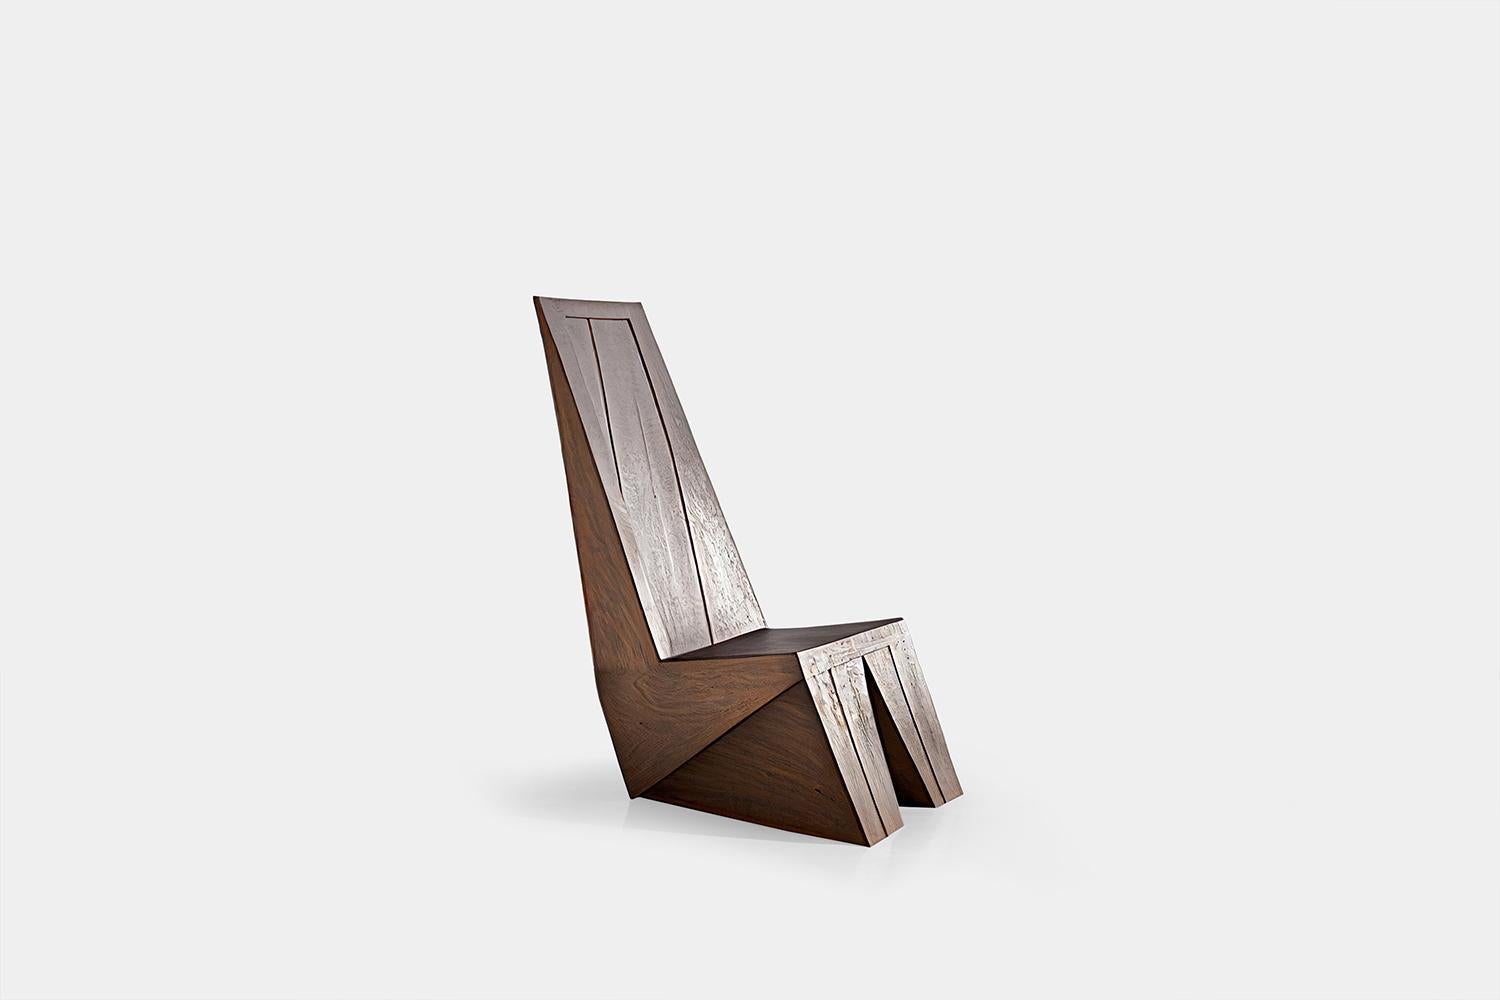 Minimalist Brutalist lounge chair, burn oak wood muted easy chair by NONO 

Brutalist chairs boast a strong, yet passive presence with minimalist designs that highlight the rich textures of natural oak wood. The goal was to showcase the beauty and